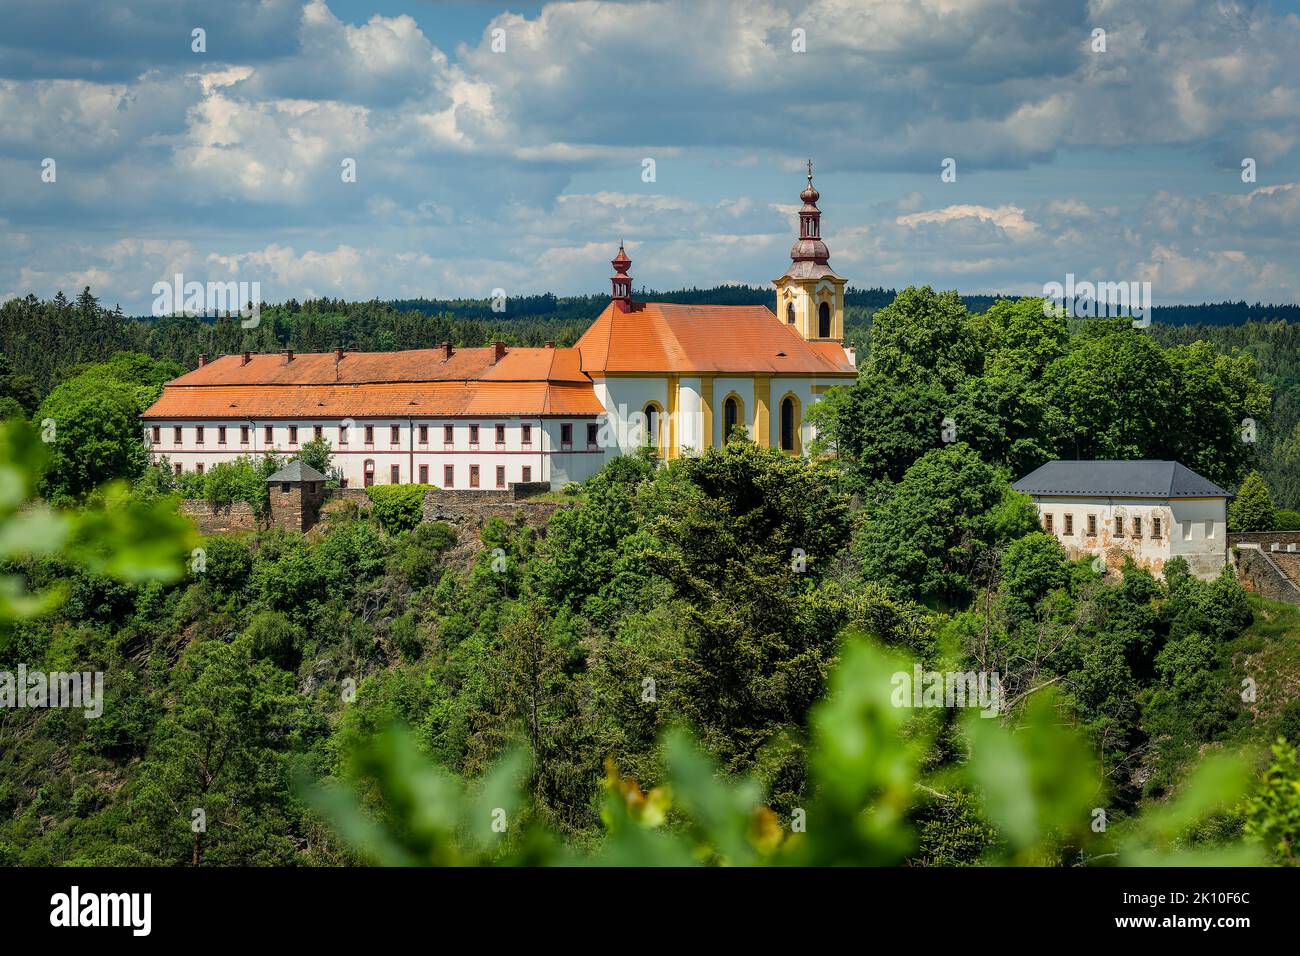 Rabstejn nad Strelou, Czech Republic - June 12 2022: View of the building of former monastery of Servites and the Virgin Mary church standing on a roc Stock Photo